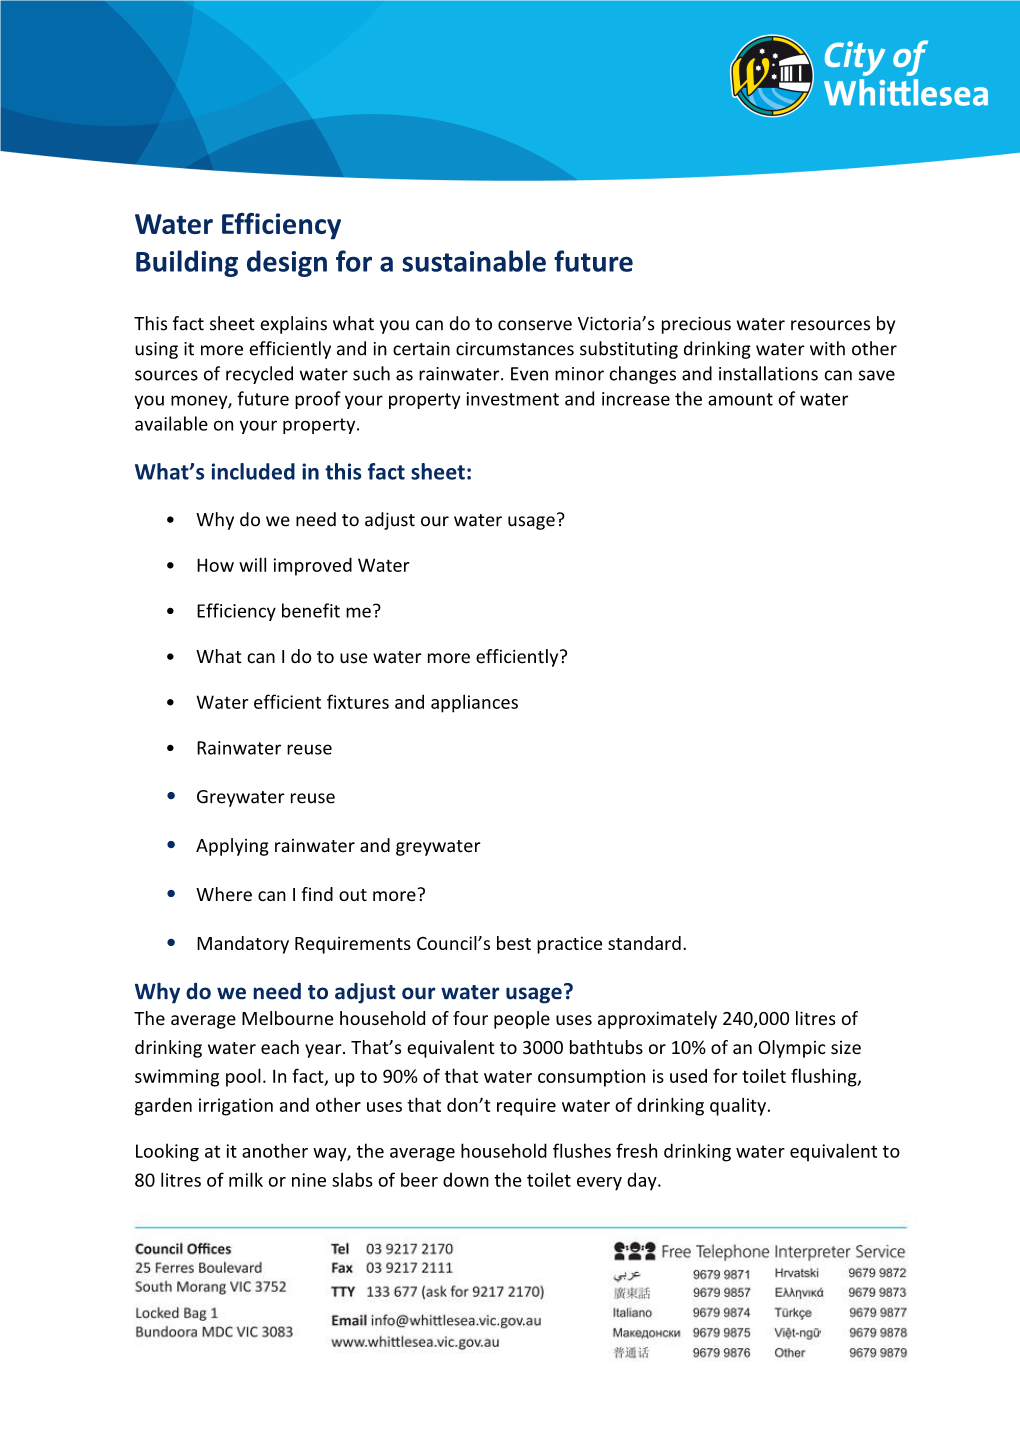 Water Efficiency Building Design for a Sustainable Future